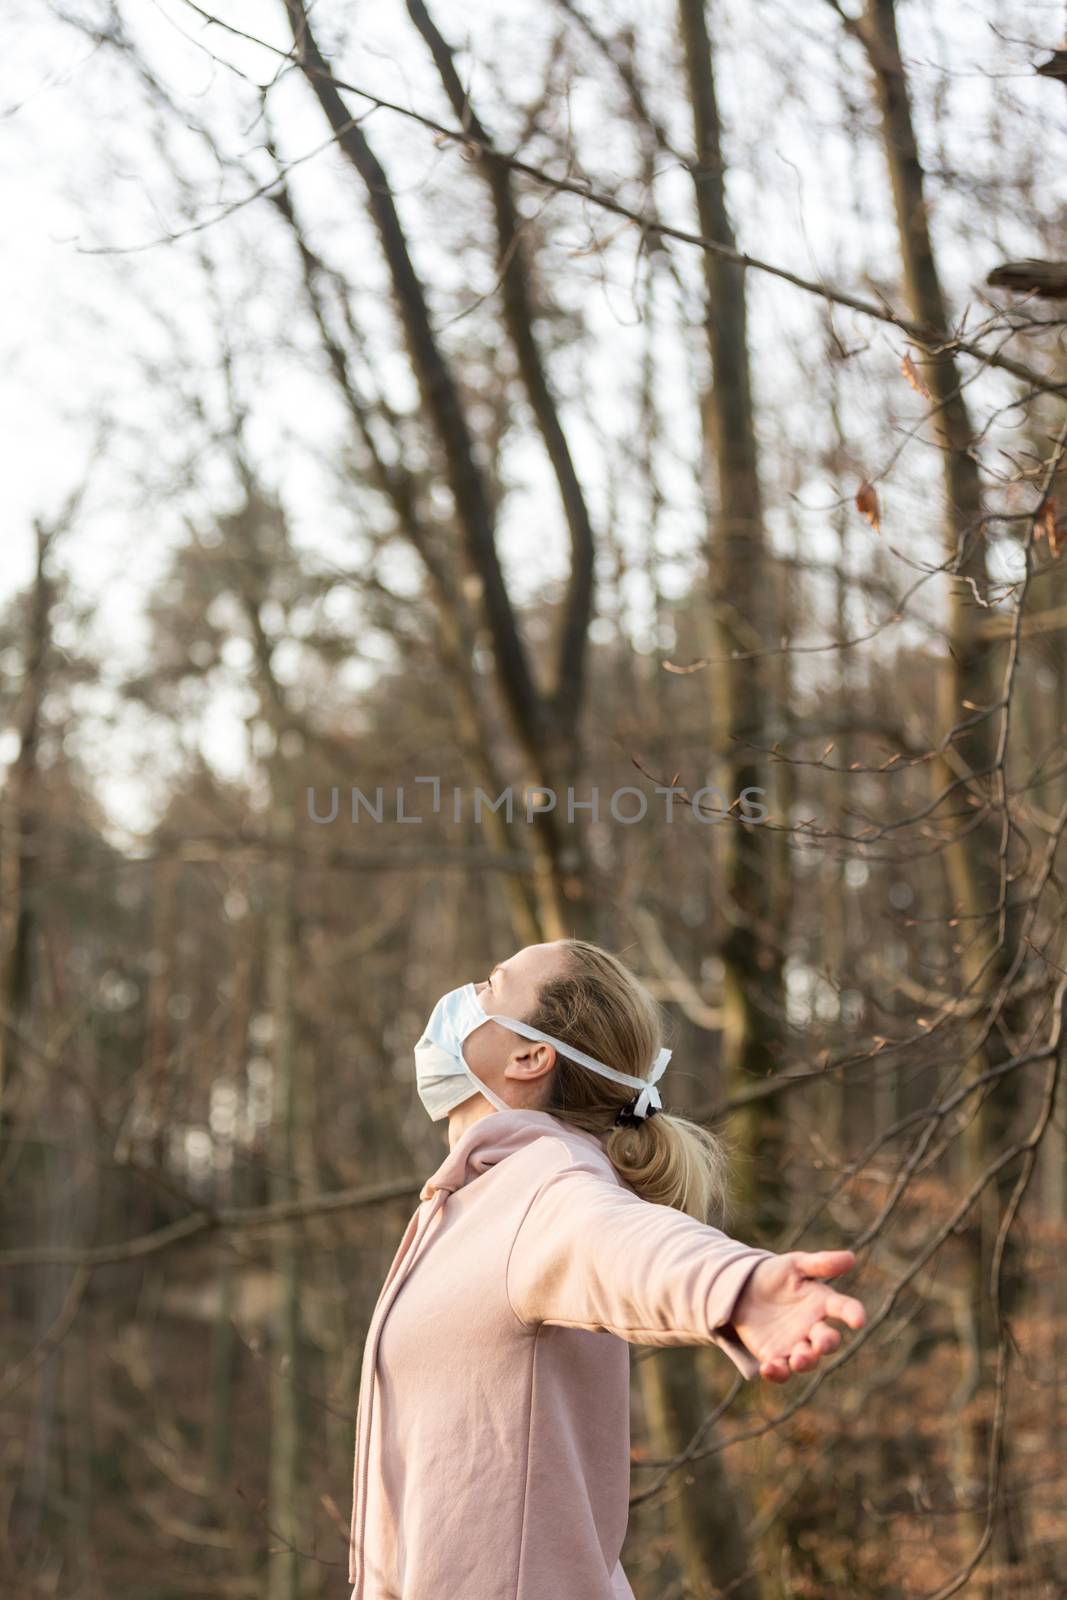 Portrait of caucasian sporty woman wearing medical protection face mask while relaxing by taking a deep breath in nature. Corona virus, or Covid-19, is spreading all over the world.